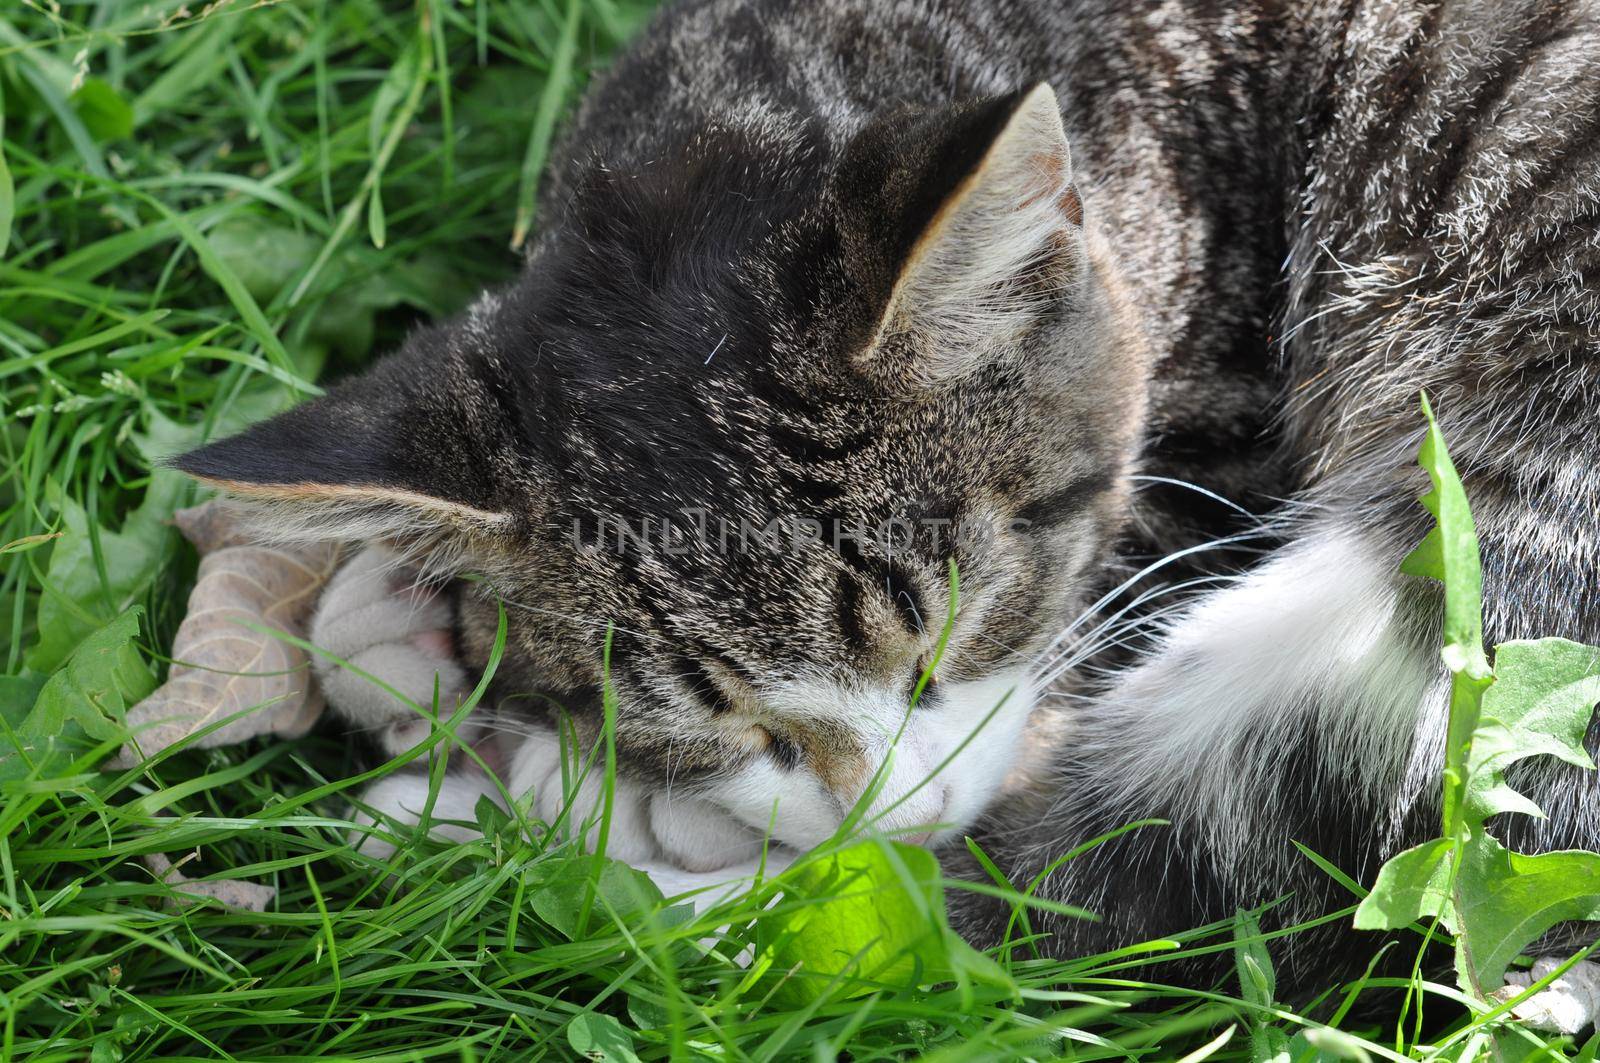 Tabby cat is sleeping in the green grass on a Sunny day